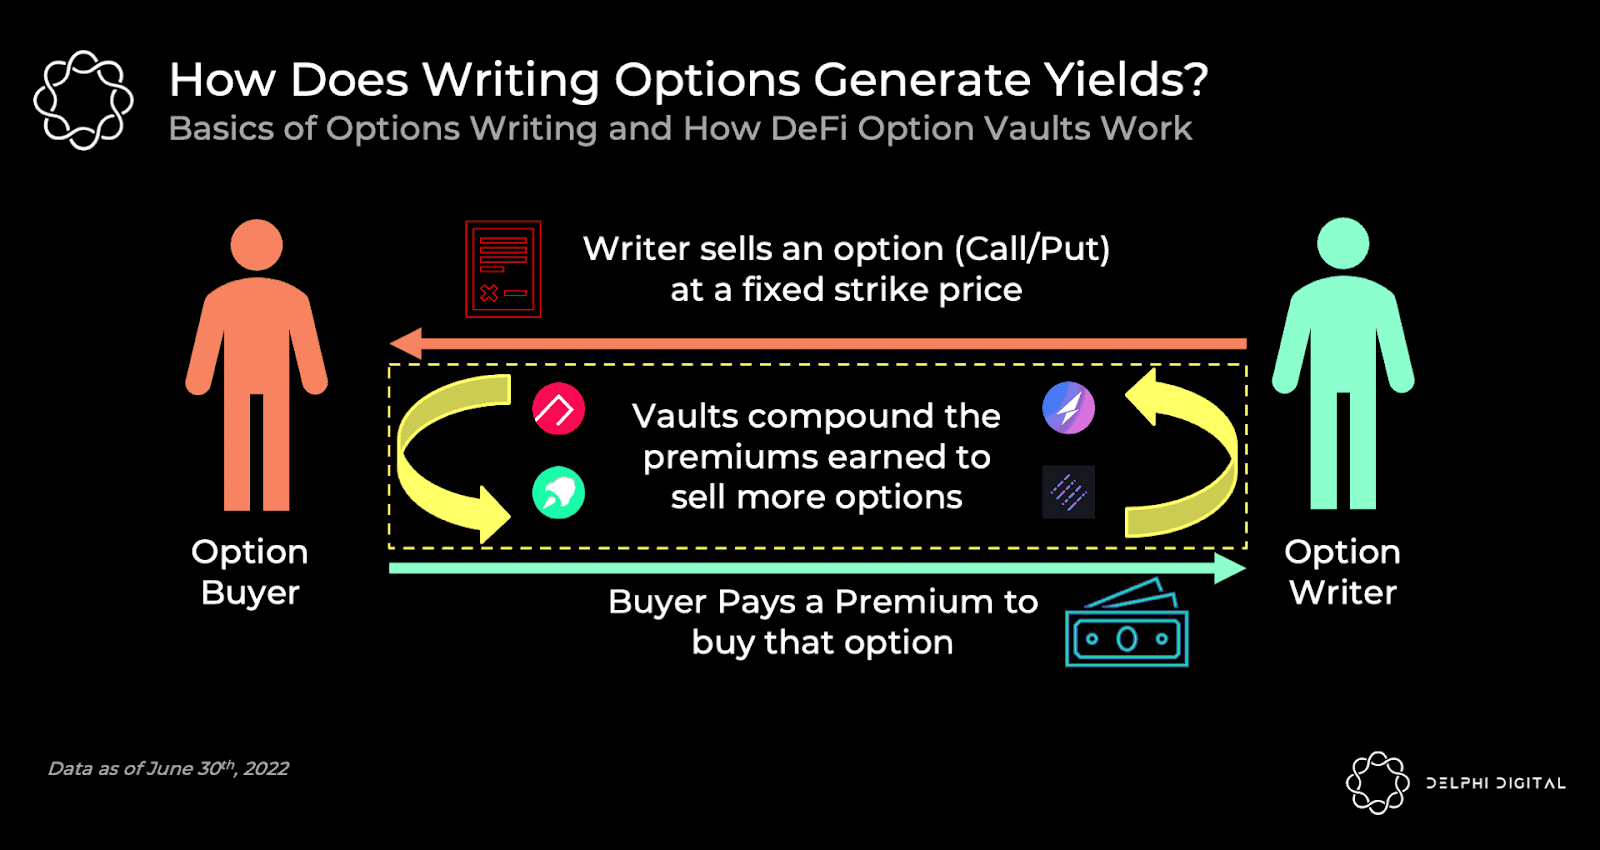 How Does Writing Options Generate Yield